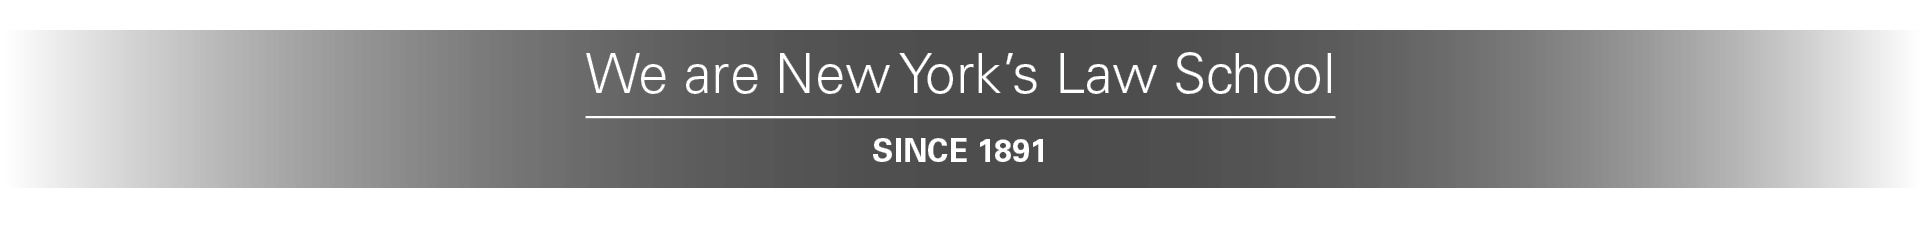 We are New York's Law School, Since 1891